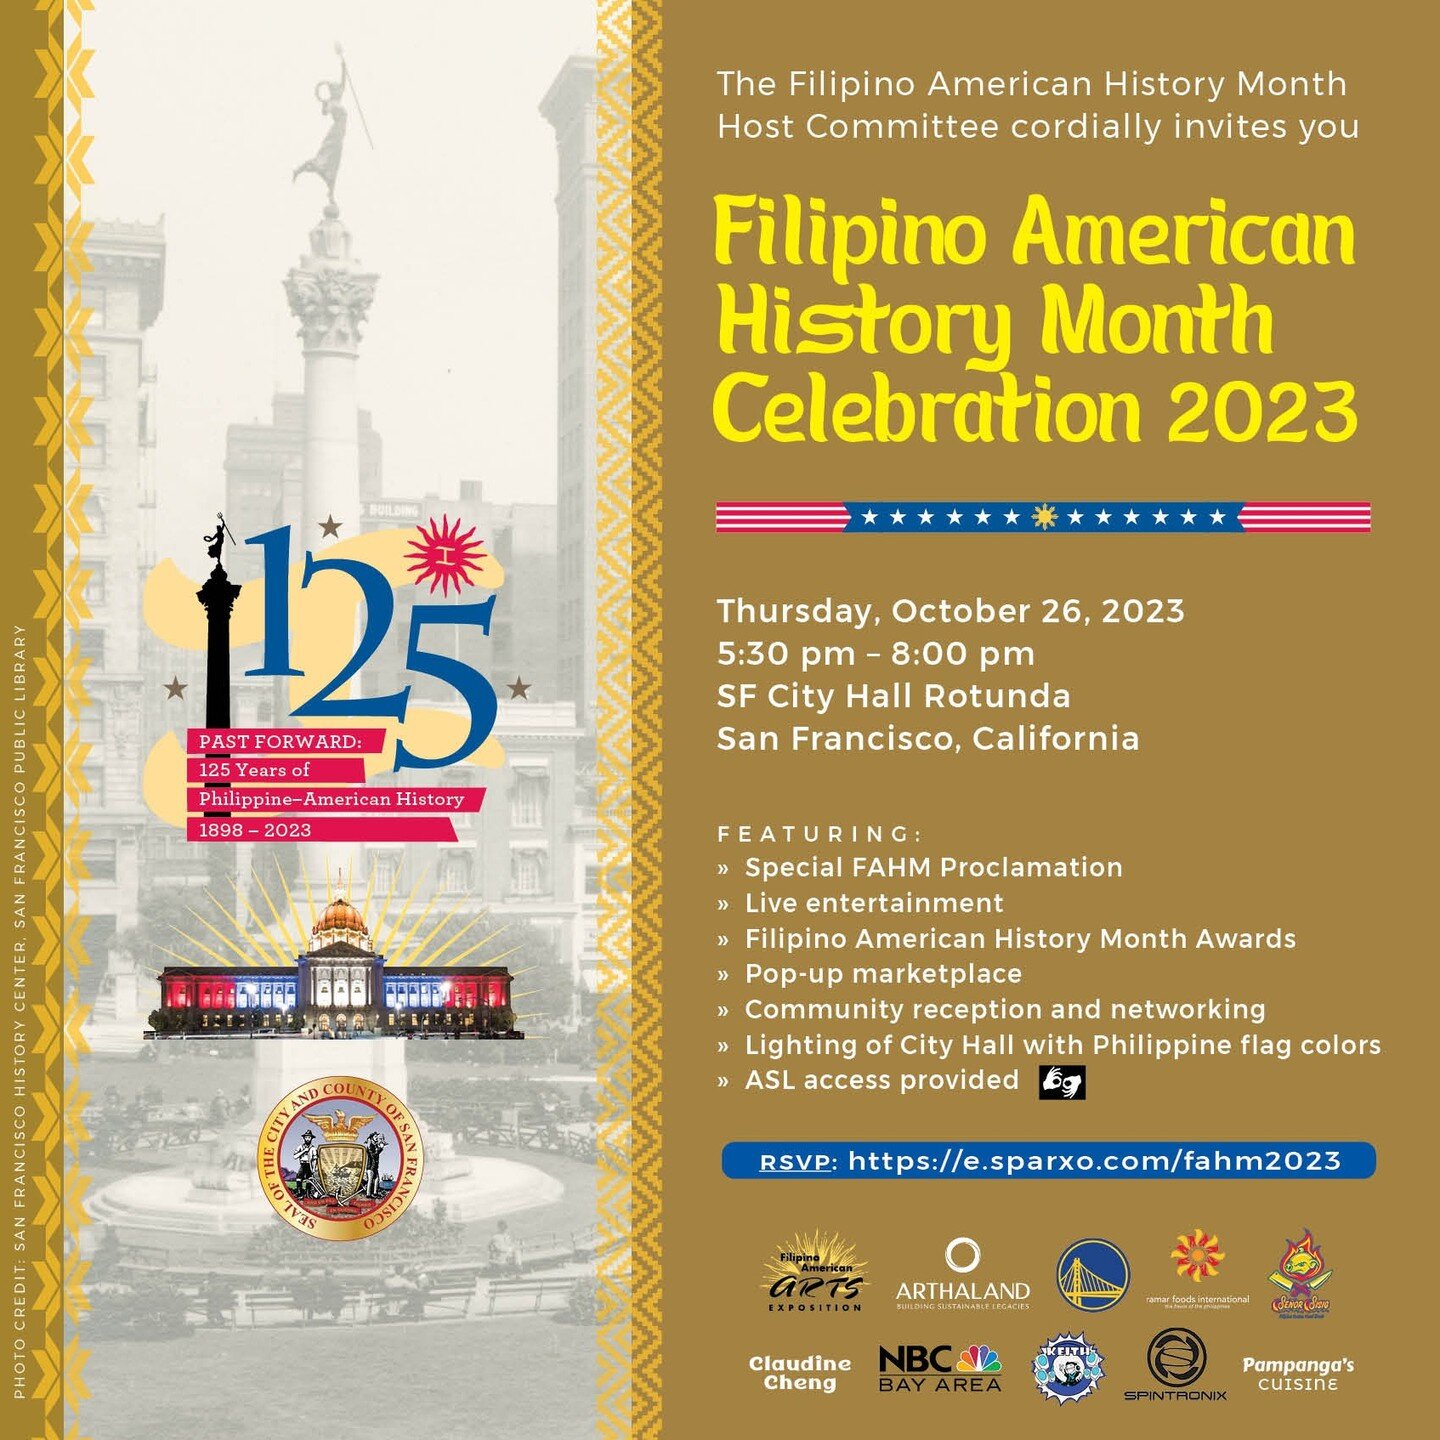 Dear Community,

I am writing to inform you of an important update regarding the 19th Annual Filipino American History Month Celebration, originally scheduled at San Francisco City Hall's Rotunda on Thursday, October 5.

We find it necessary to postp